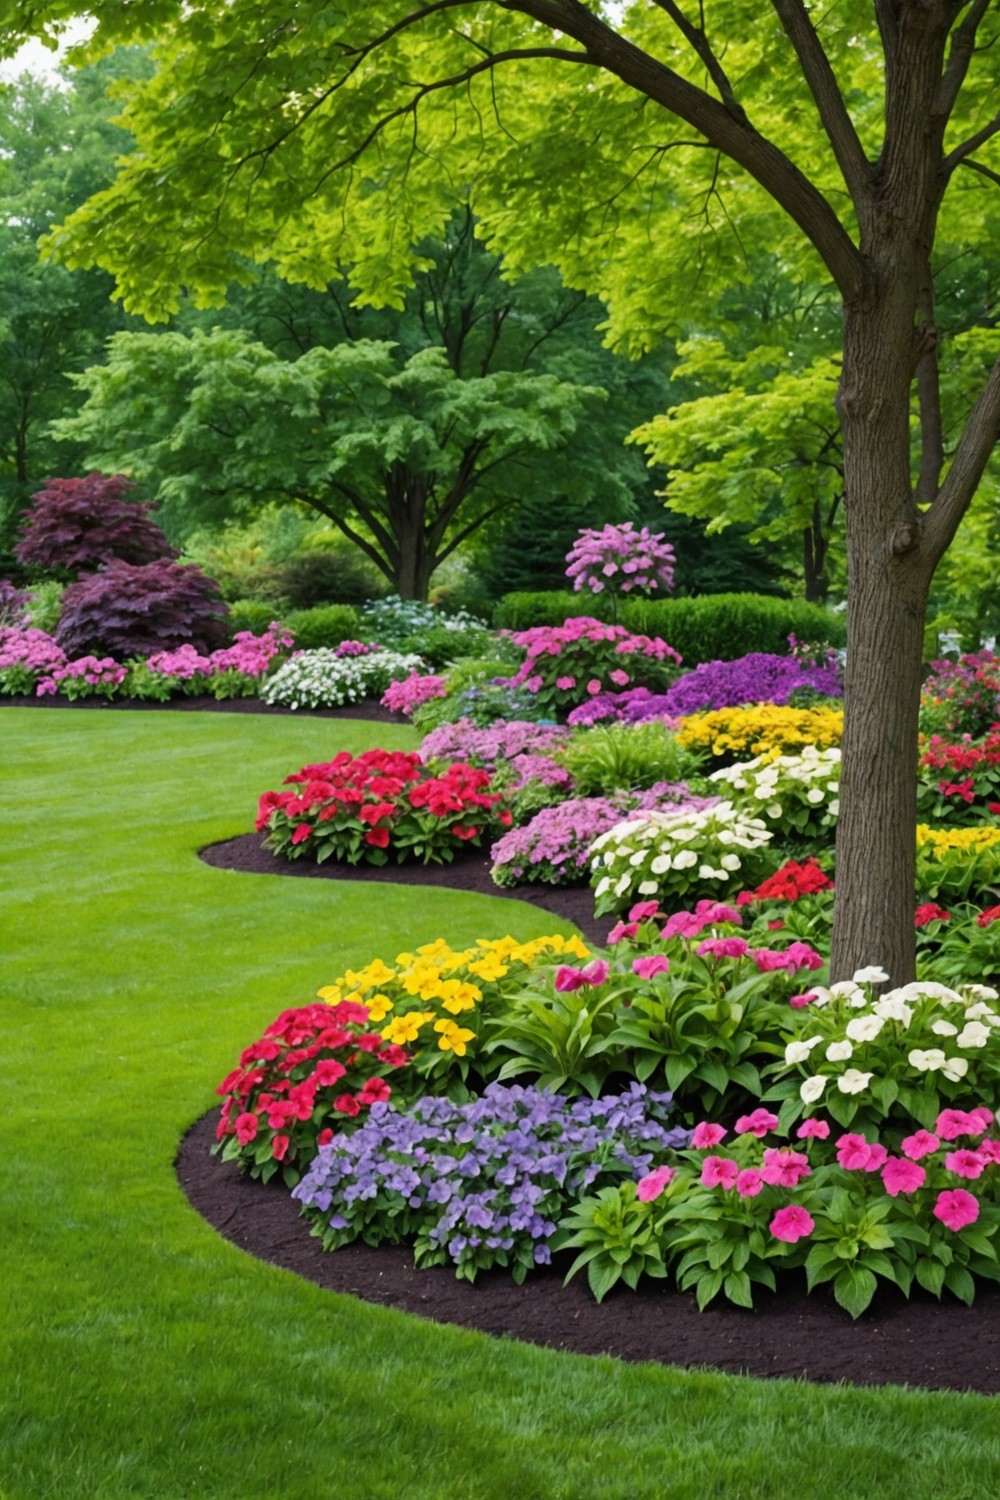 Plant a Flower Bed Underneath with Seasonal Blooms